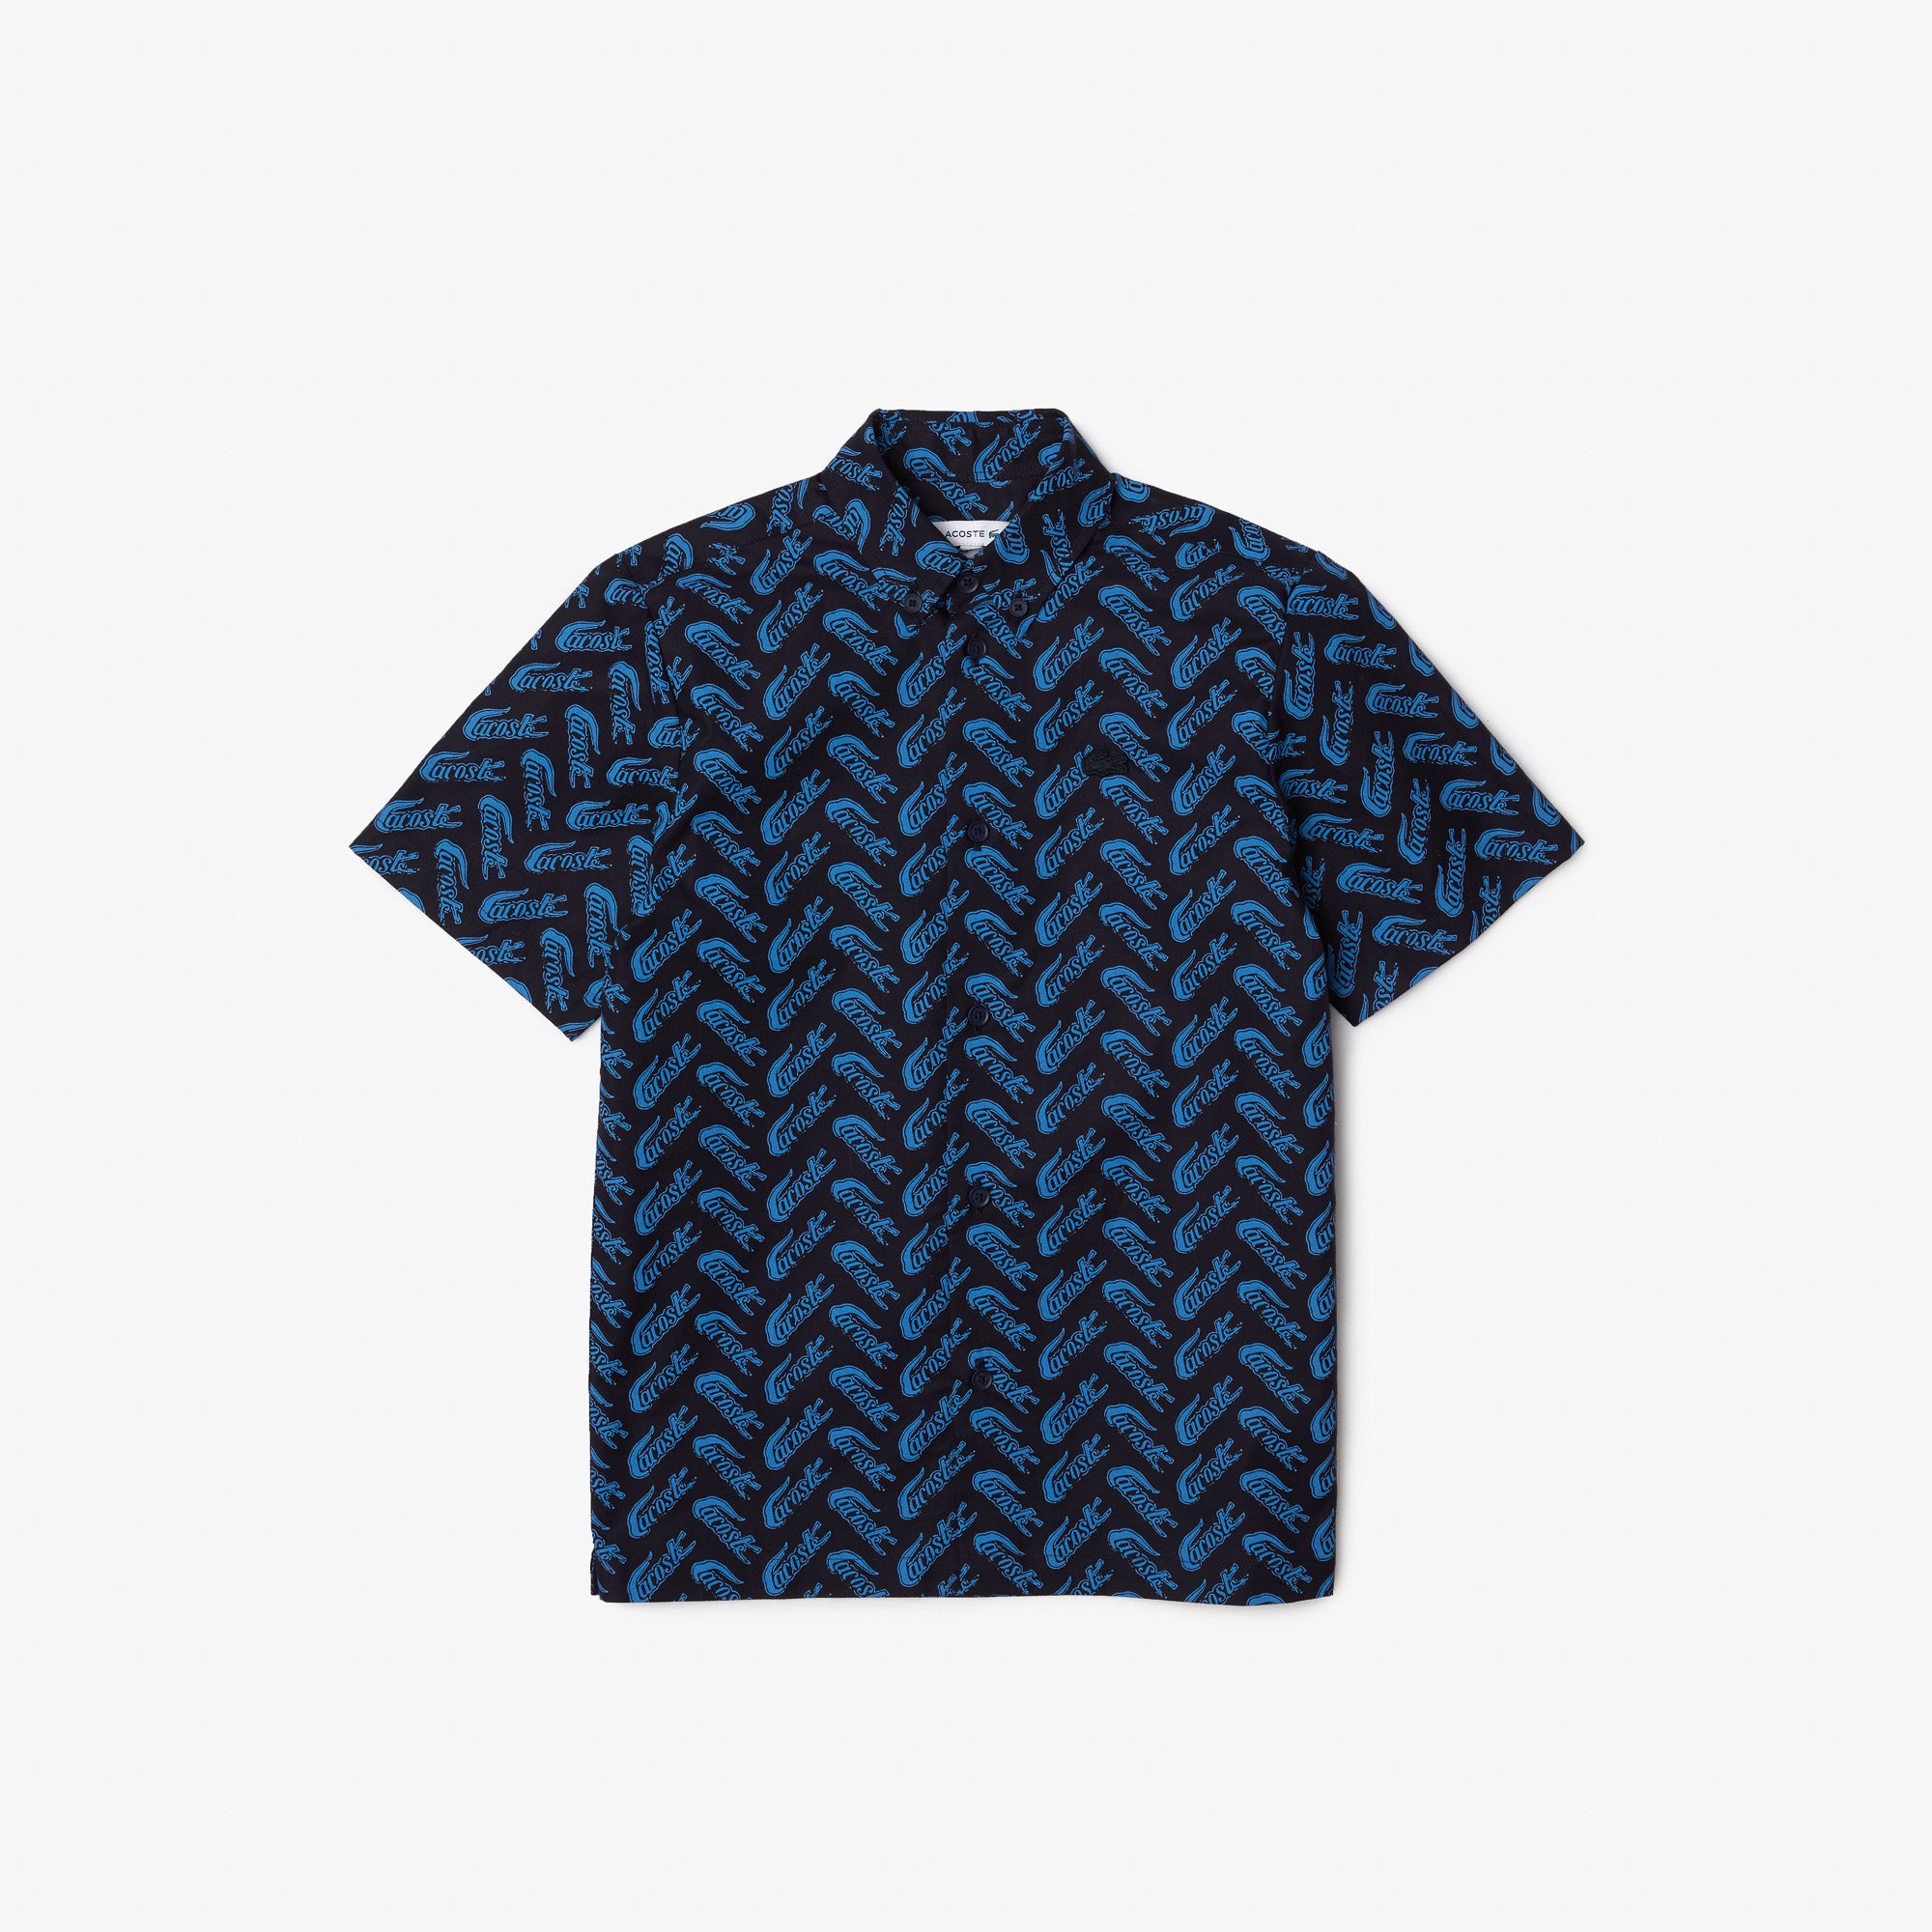 Lacoste Kids' Short Sleeve Cotton Voile Shirt Navy Blue/Ethereal CJ5482 F65